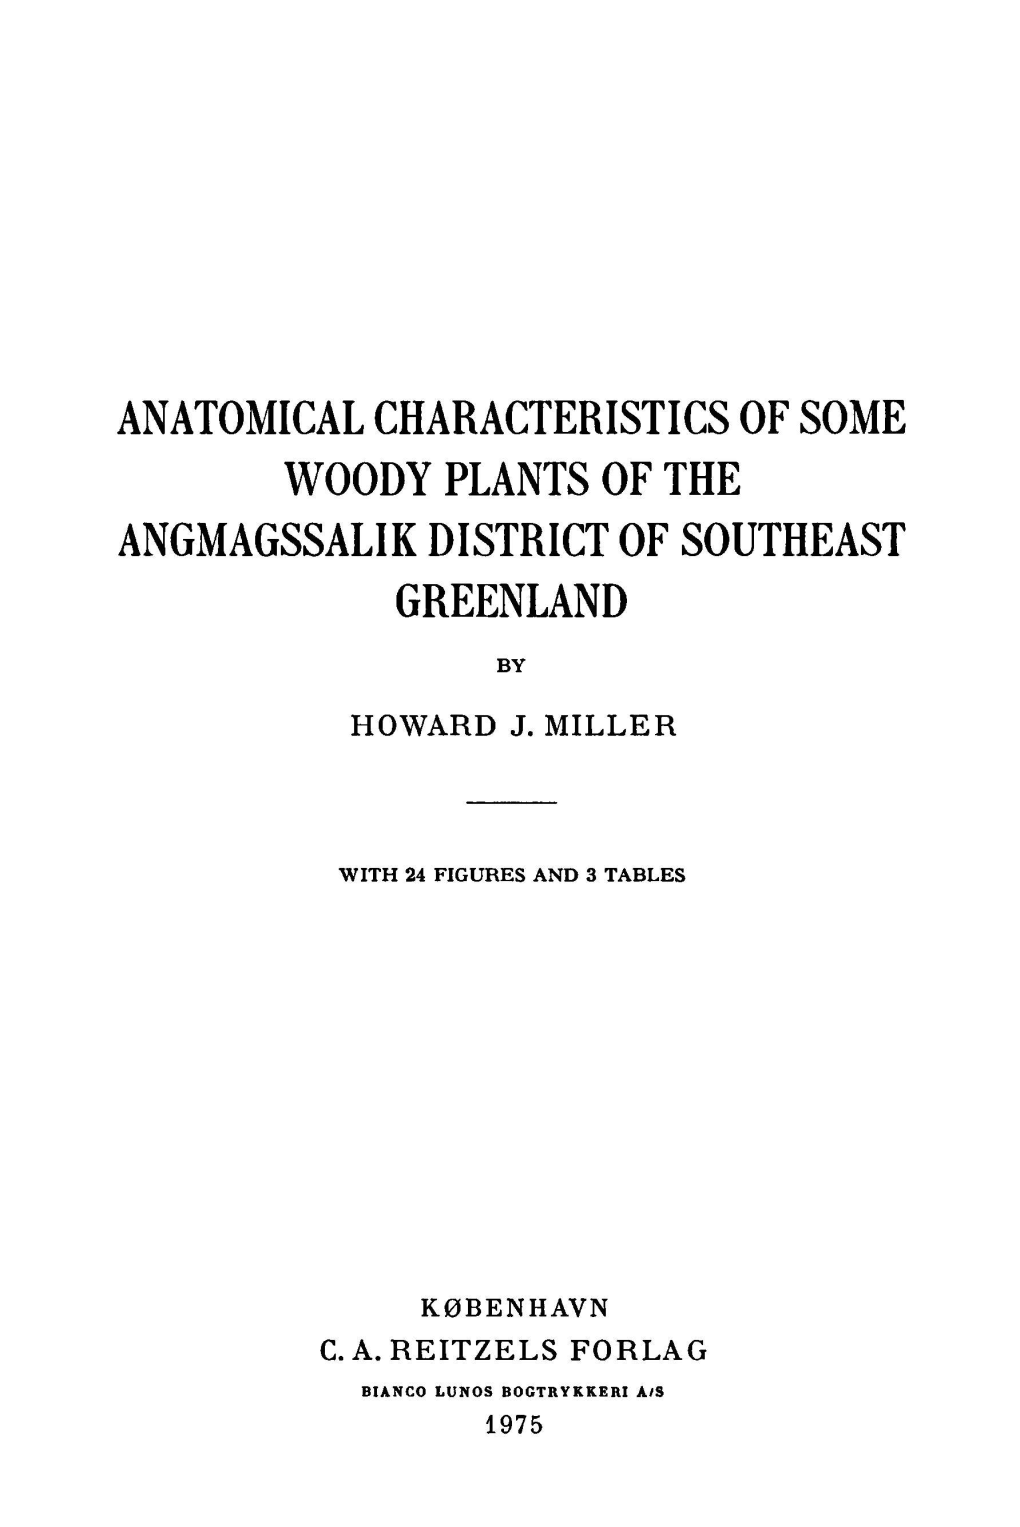 Anatomical Characteristics of Some Woody Plants of the Angmagssalik District of Southeast Greenland